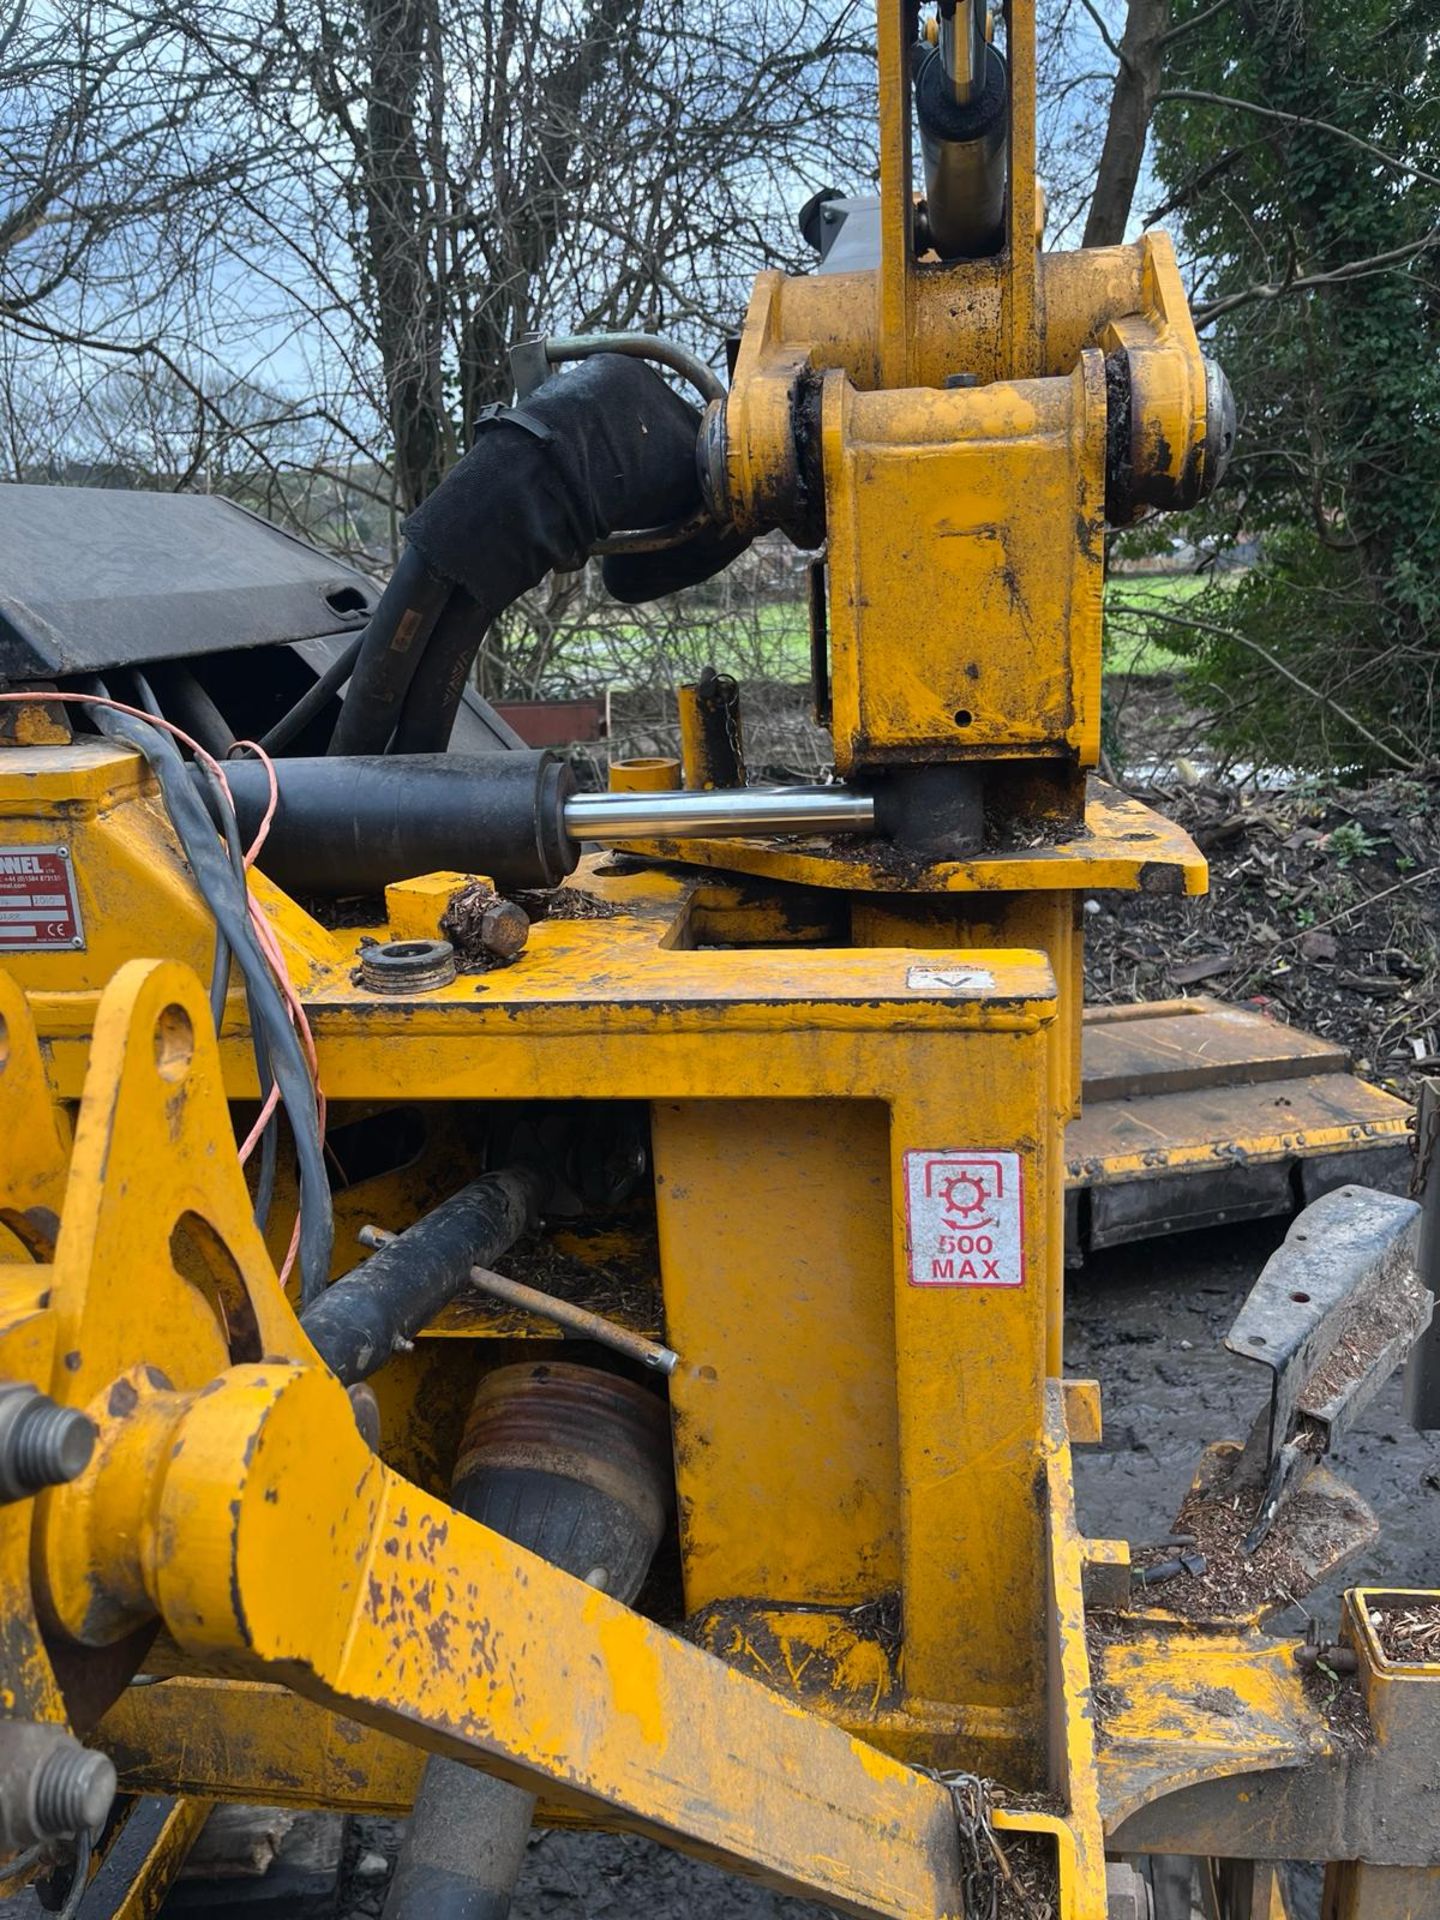 2010 MCCONNELL POWER ARM 55 HEDGE TRIMMER